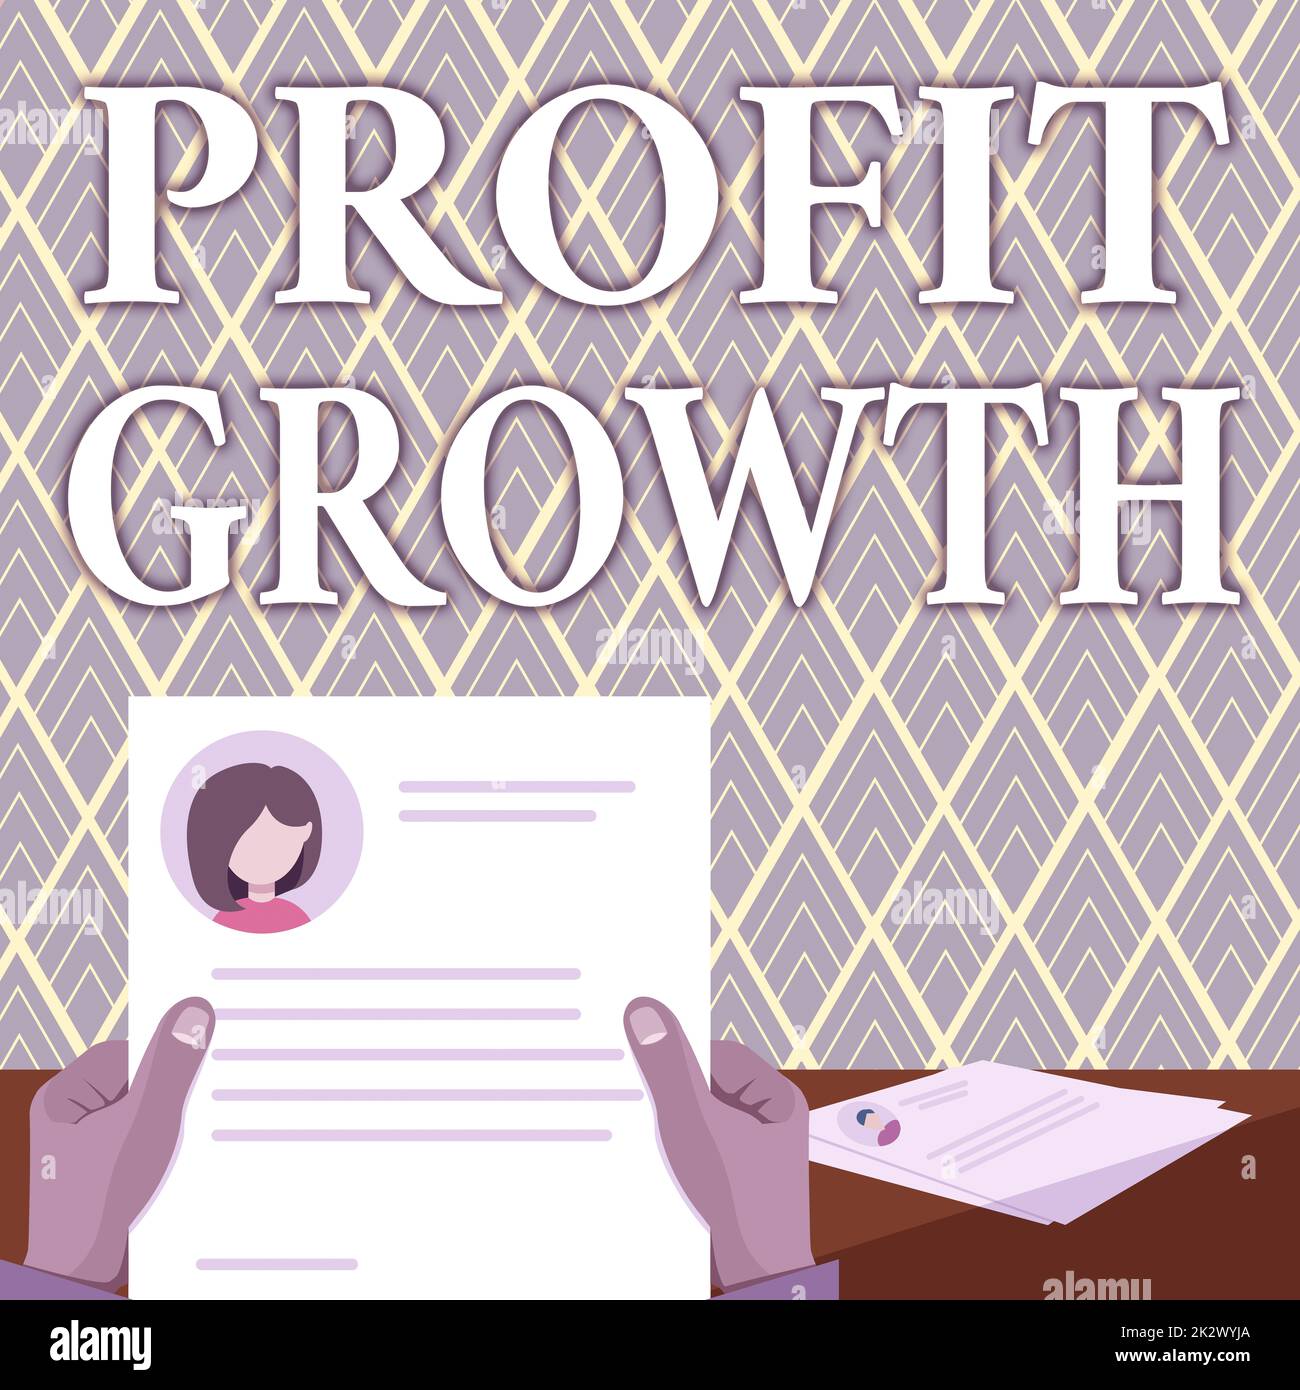 Sign displaying Profit Growth, Business idea Objectives Interrelation of Overall Sales Market Shares Hands Holding Resume Showing New Career Opportuni Stock Photo